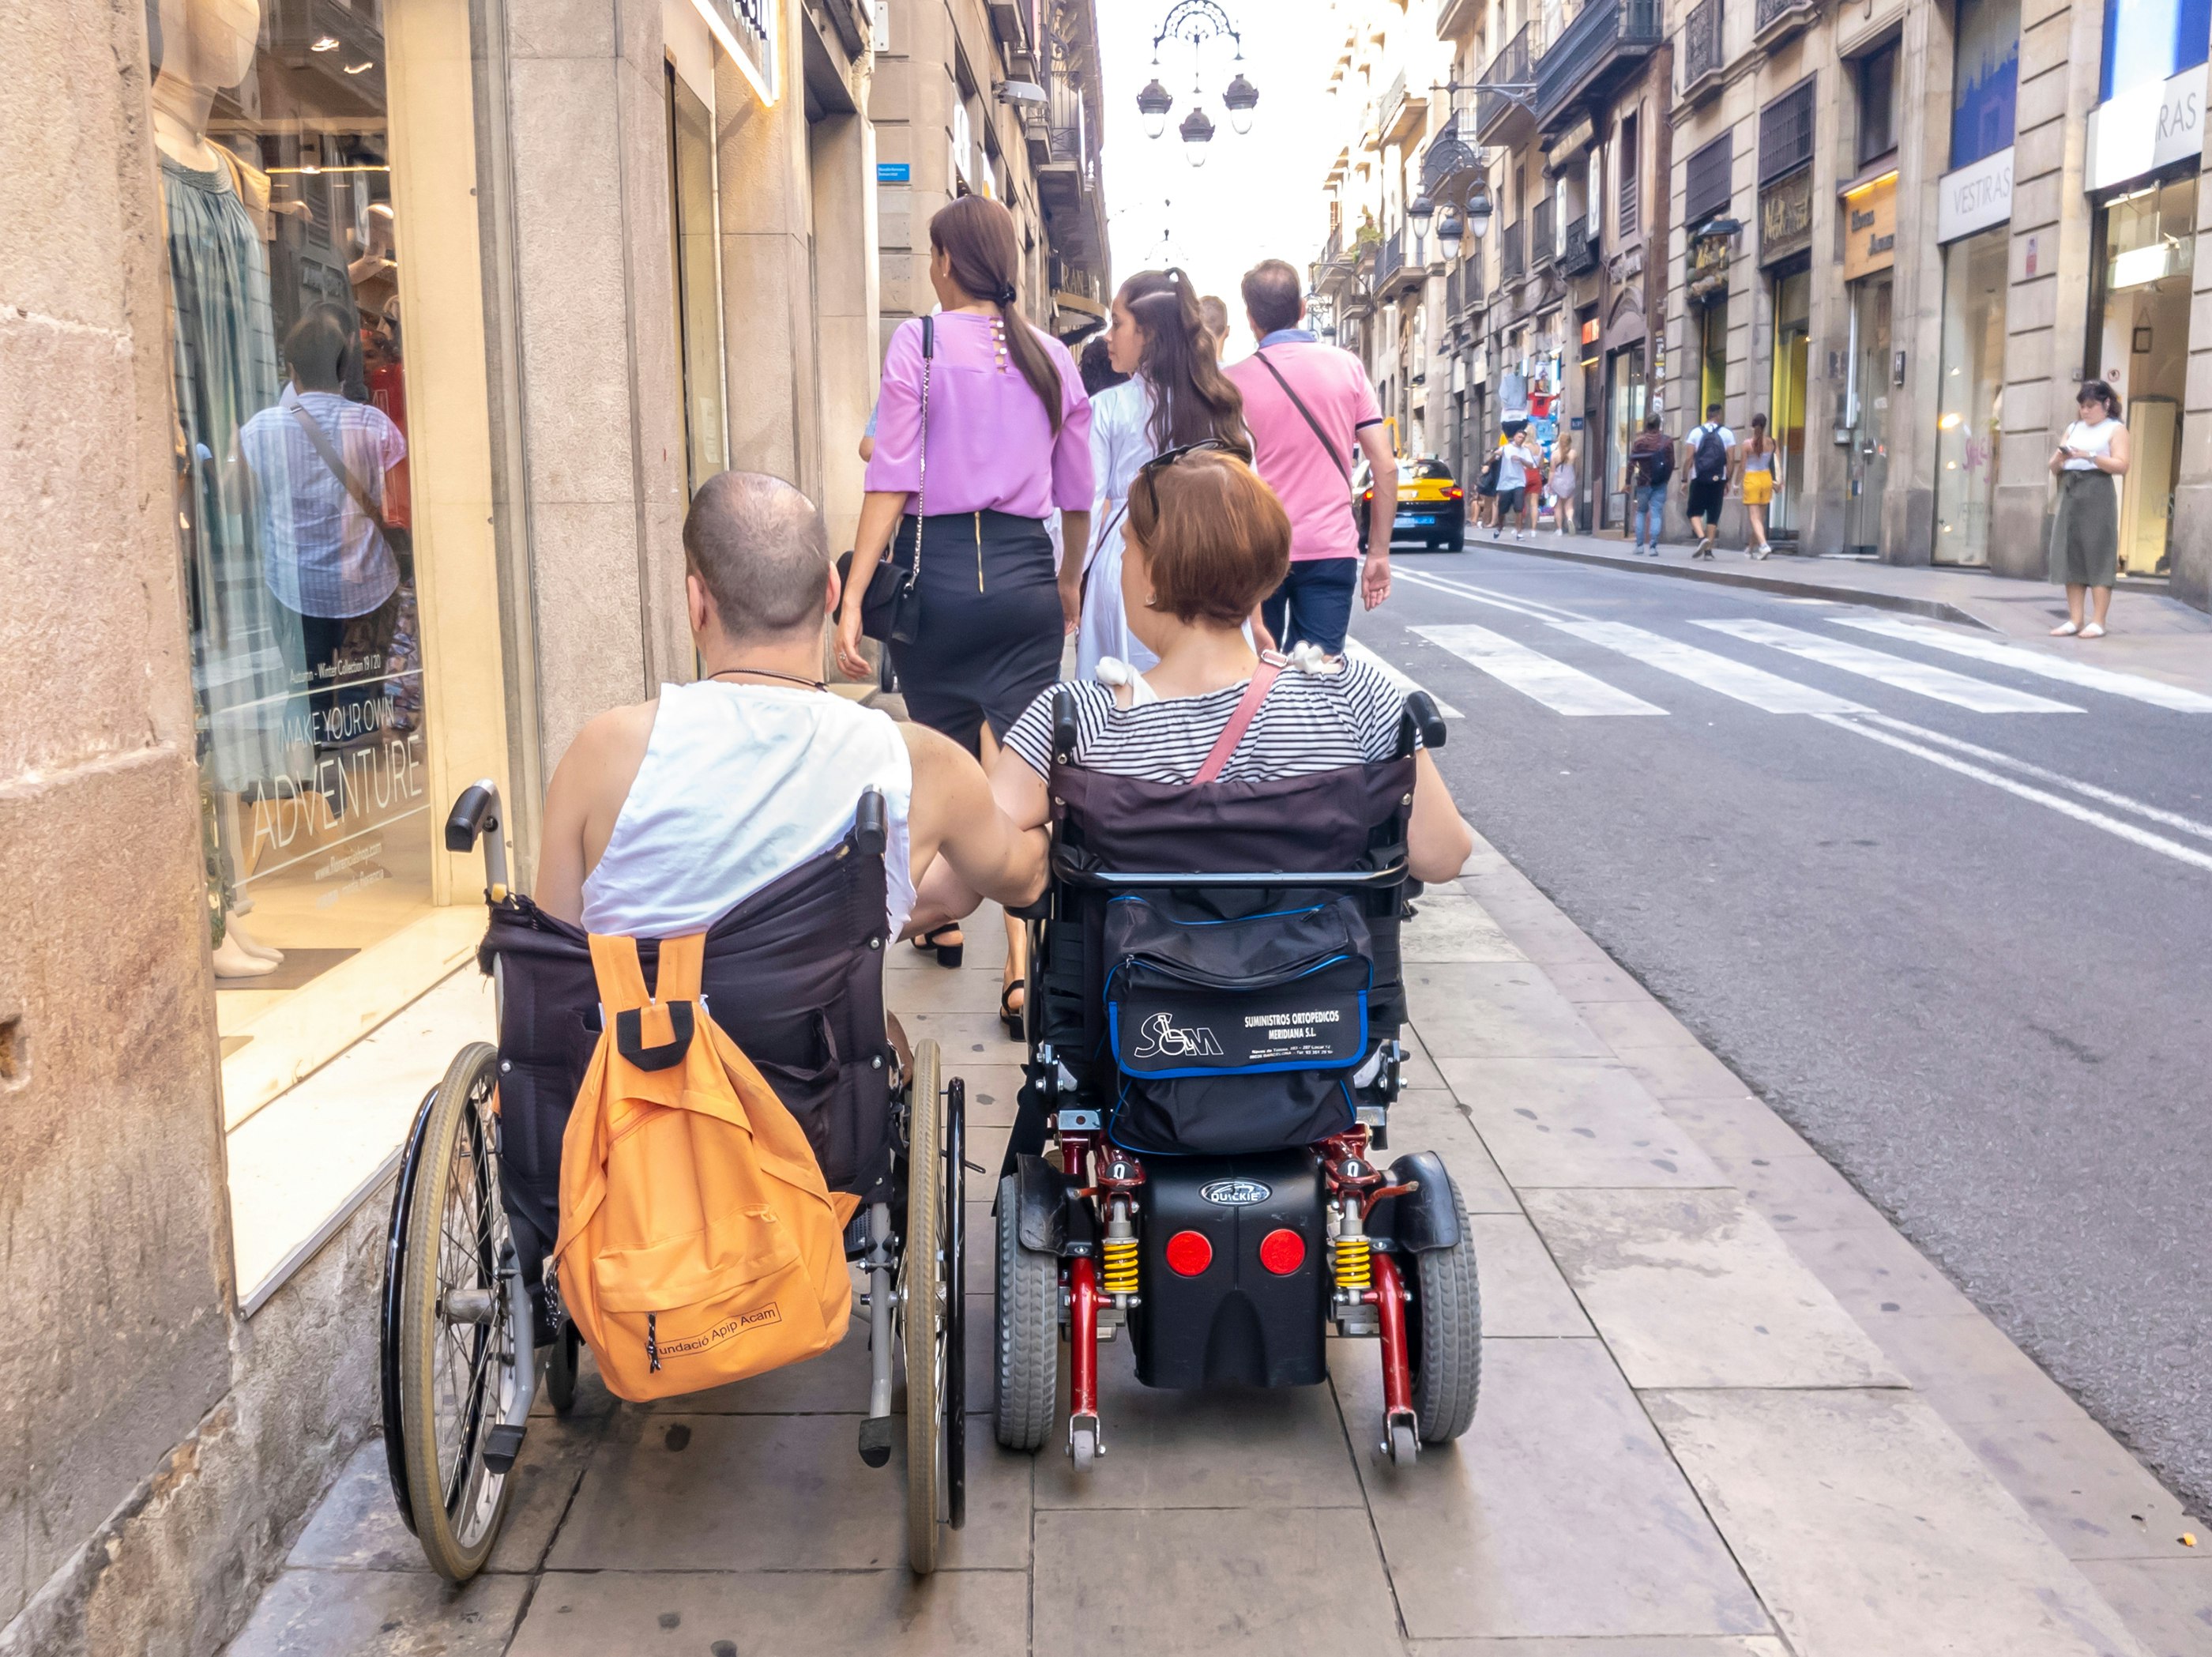 Barcelona wheelchair users traveling together up a Barcelona street